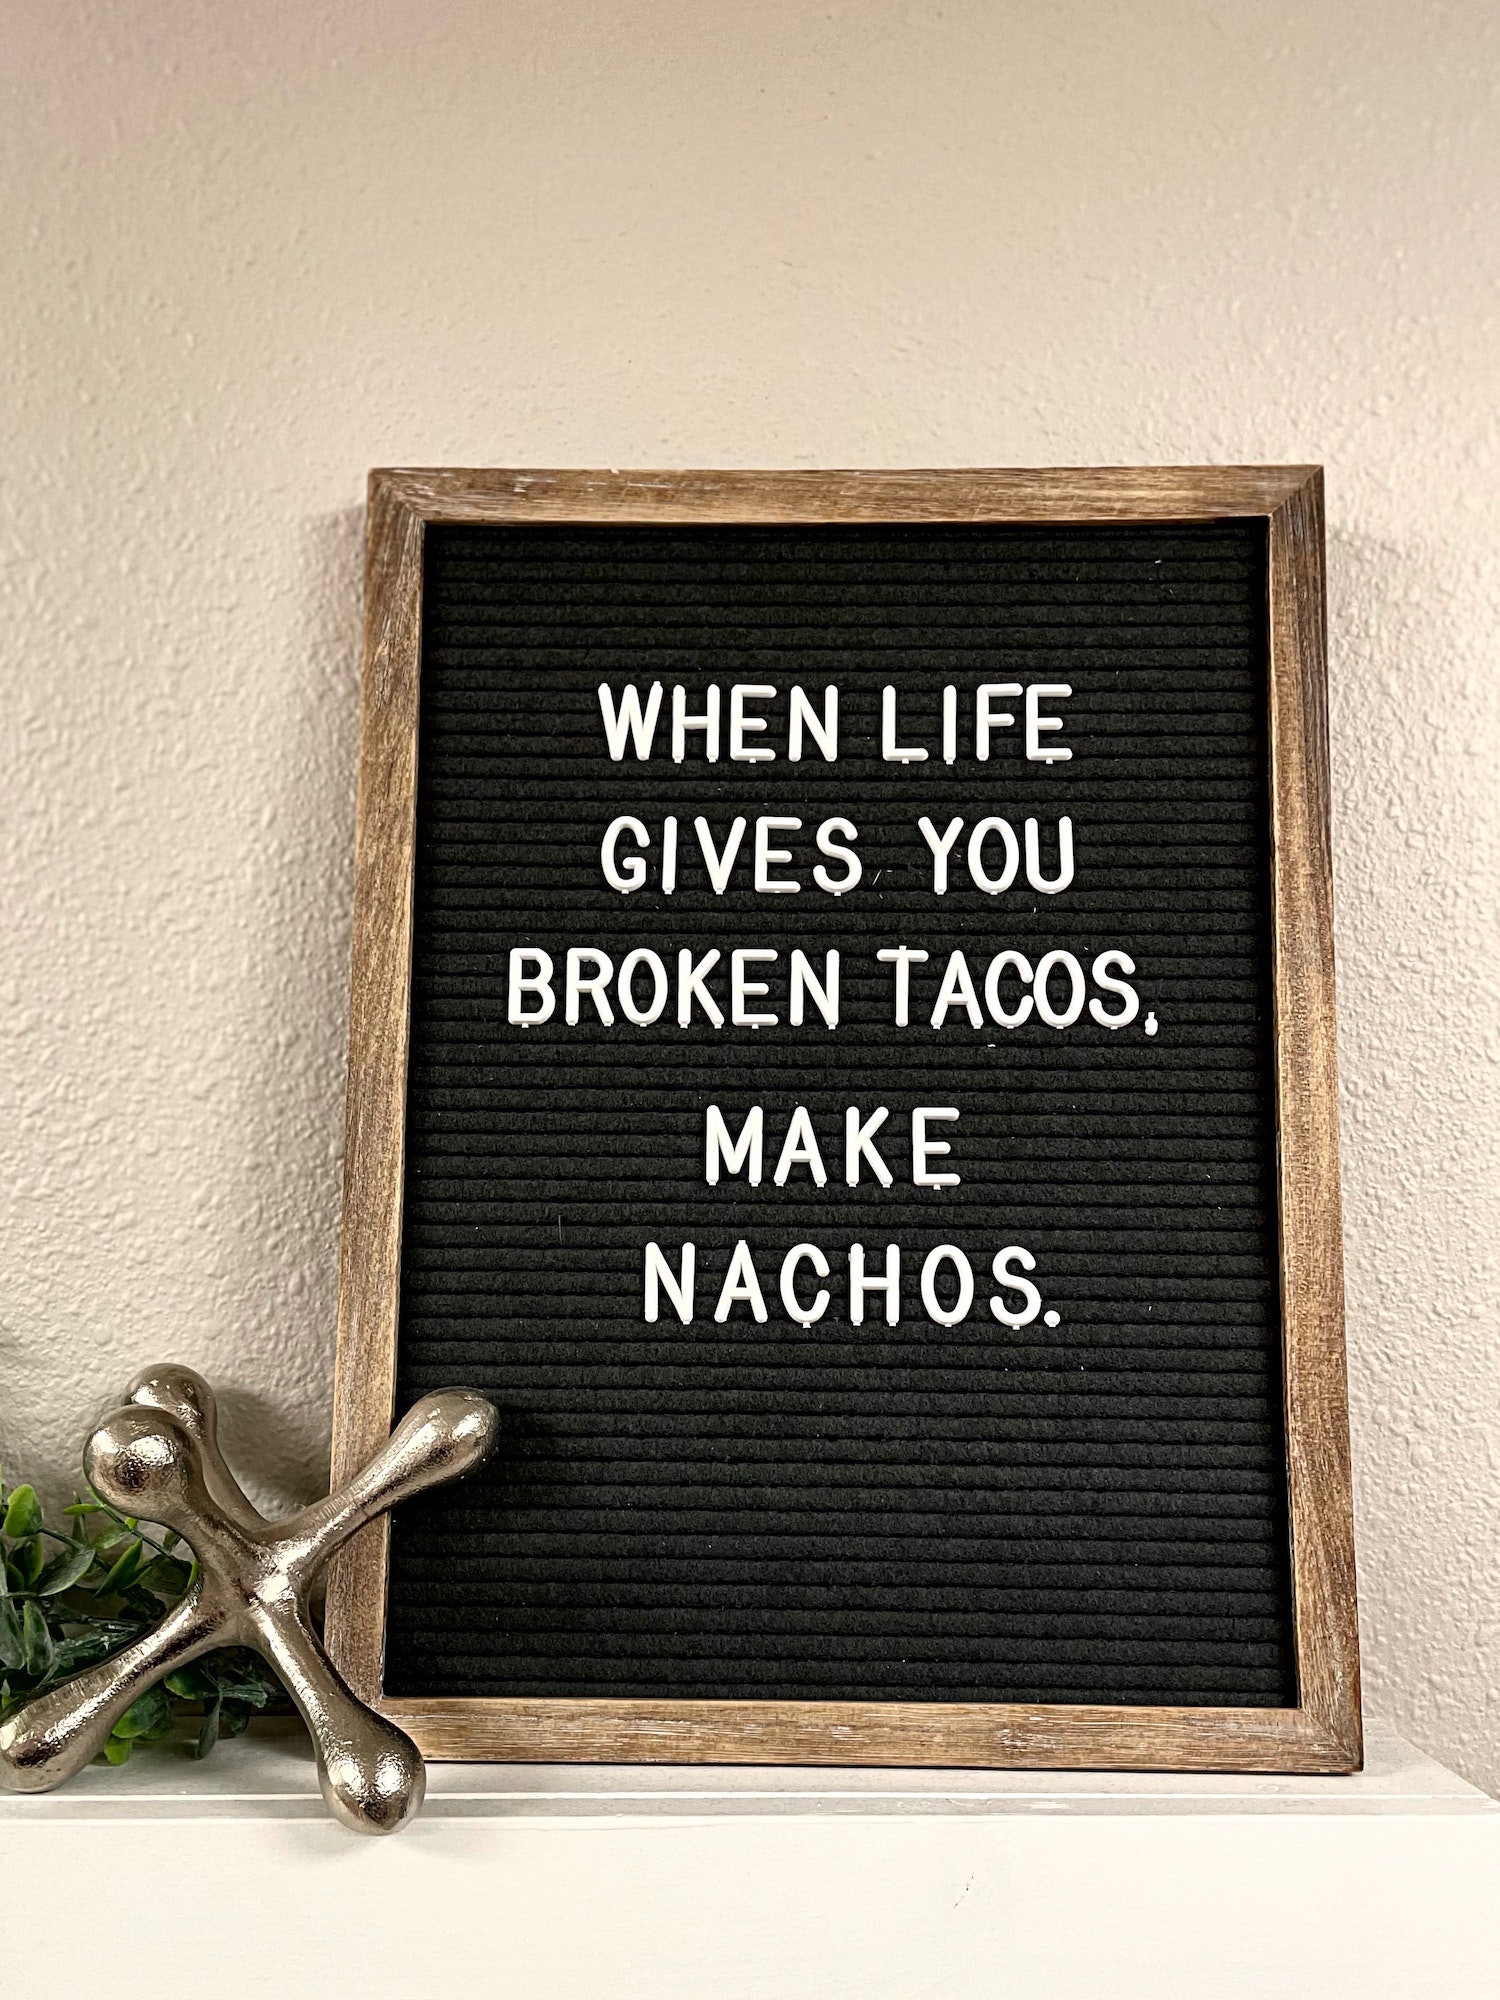 Message board advice think positive make tacos